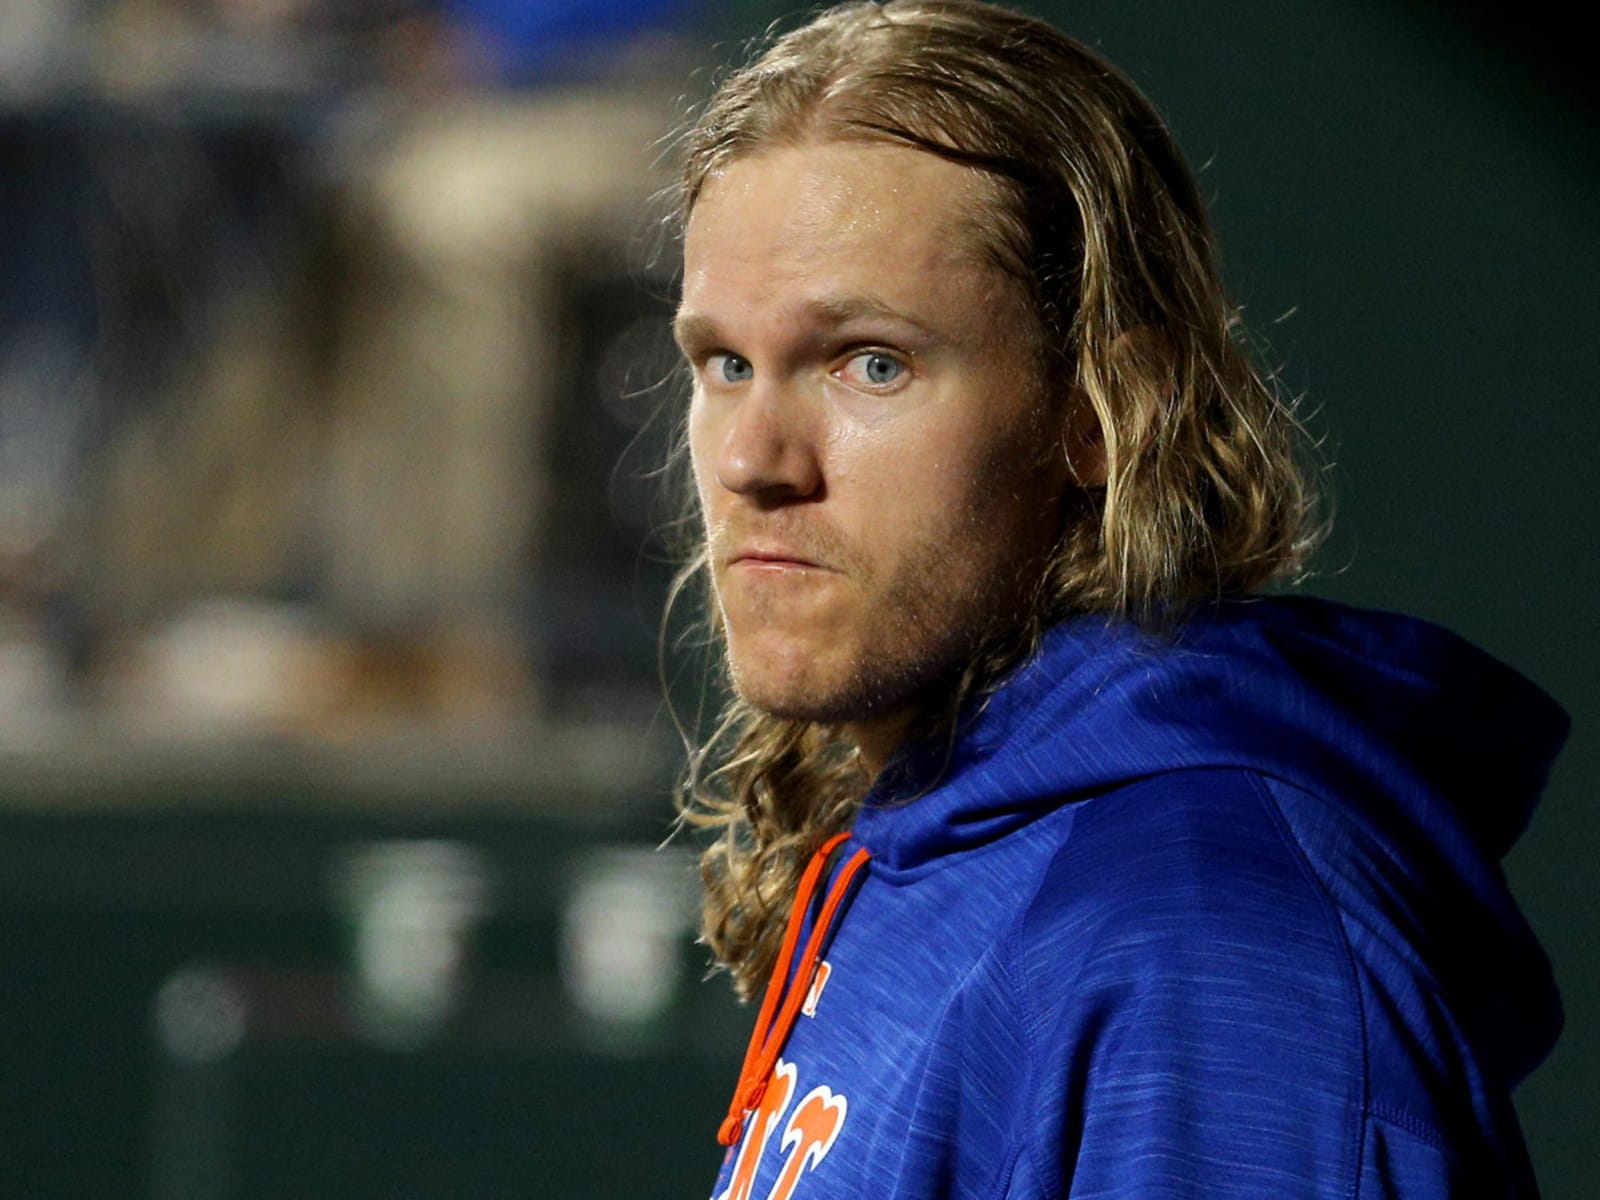 Noah Syndergaard possibly dating podcaster (and ex) Alexandra Cooper again